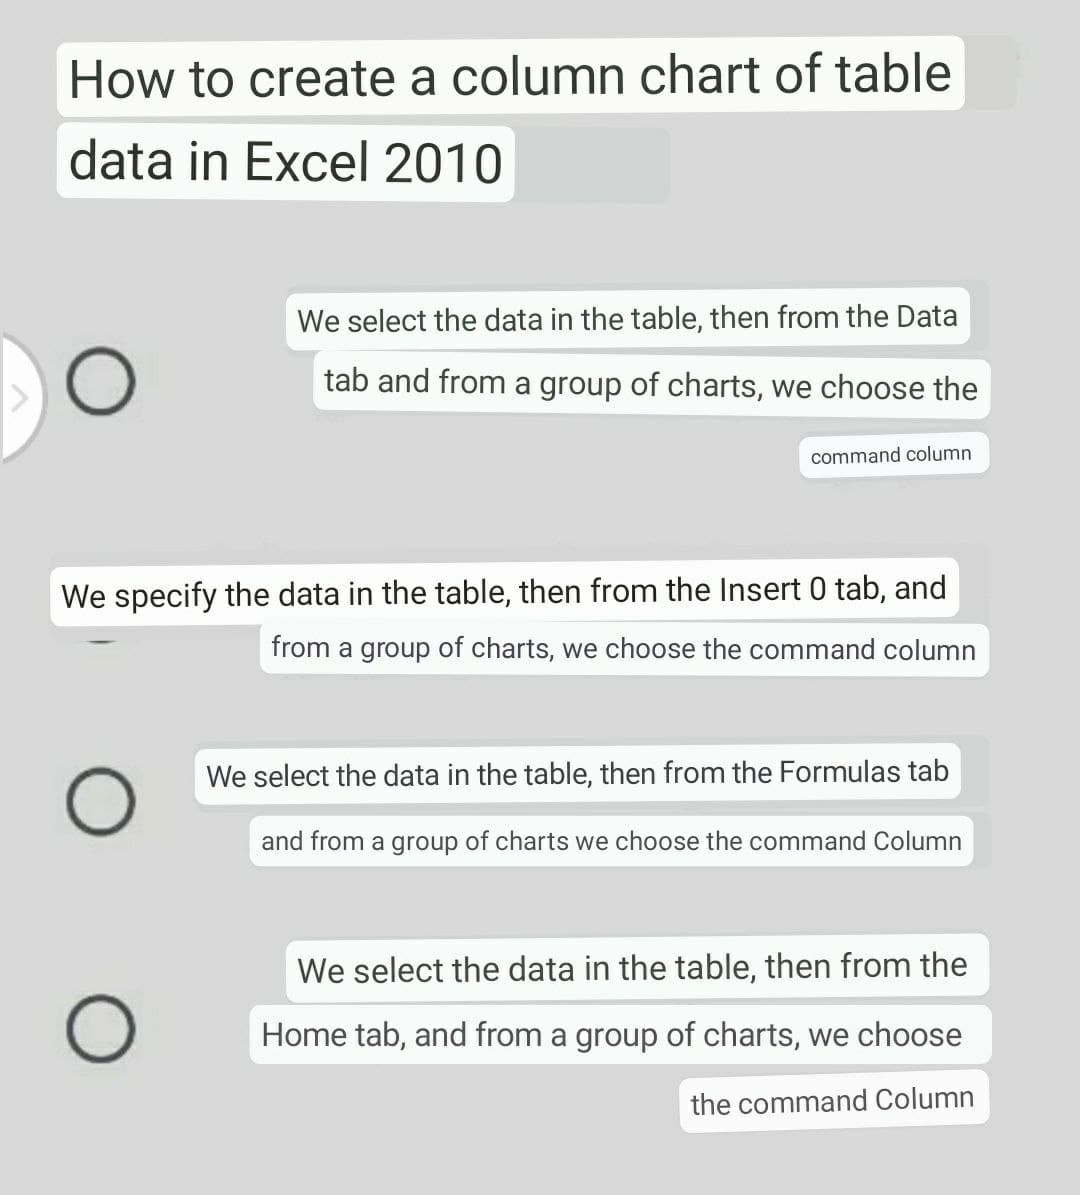 How to create a column chart of table
data in Excel 2010
We select the data in the table, then from the Data
O
tab and from a group of charts, we choose the
command column
We specify the data in the table, then from the Insert 0 tab, and
from a group of charts, we choose the command column
We select the data in the table, then from the Formulas tab
O
and from a group of charts we choose the command Column
We select the data in the table, then from the
Home tab, and from a group of charts, we choose
the command Column
O